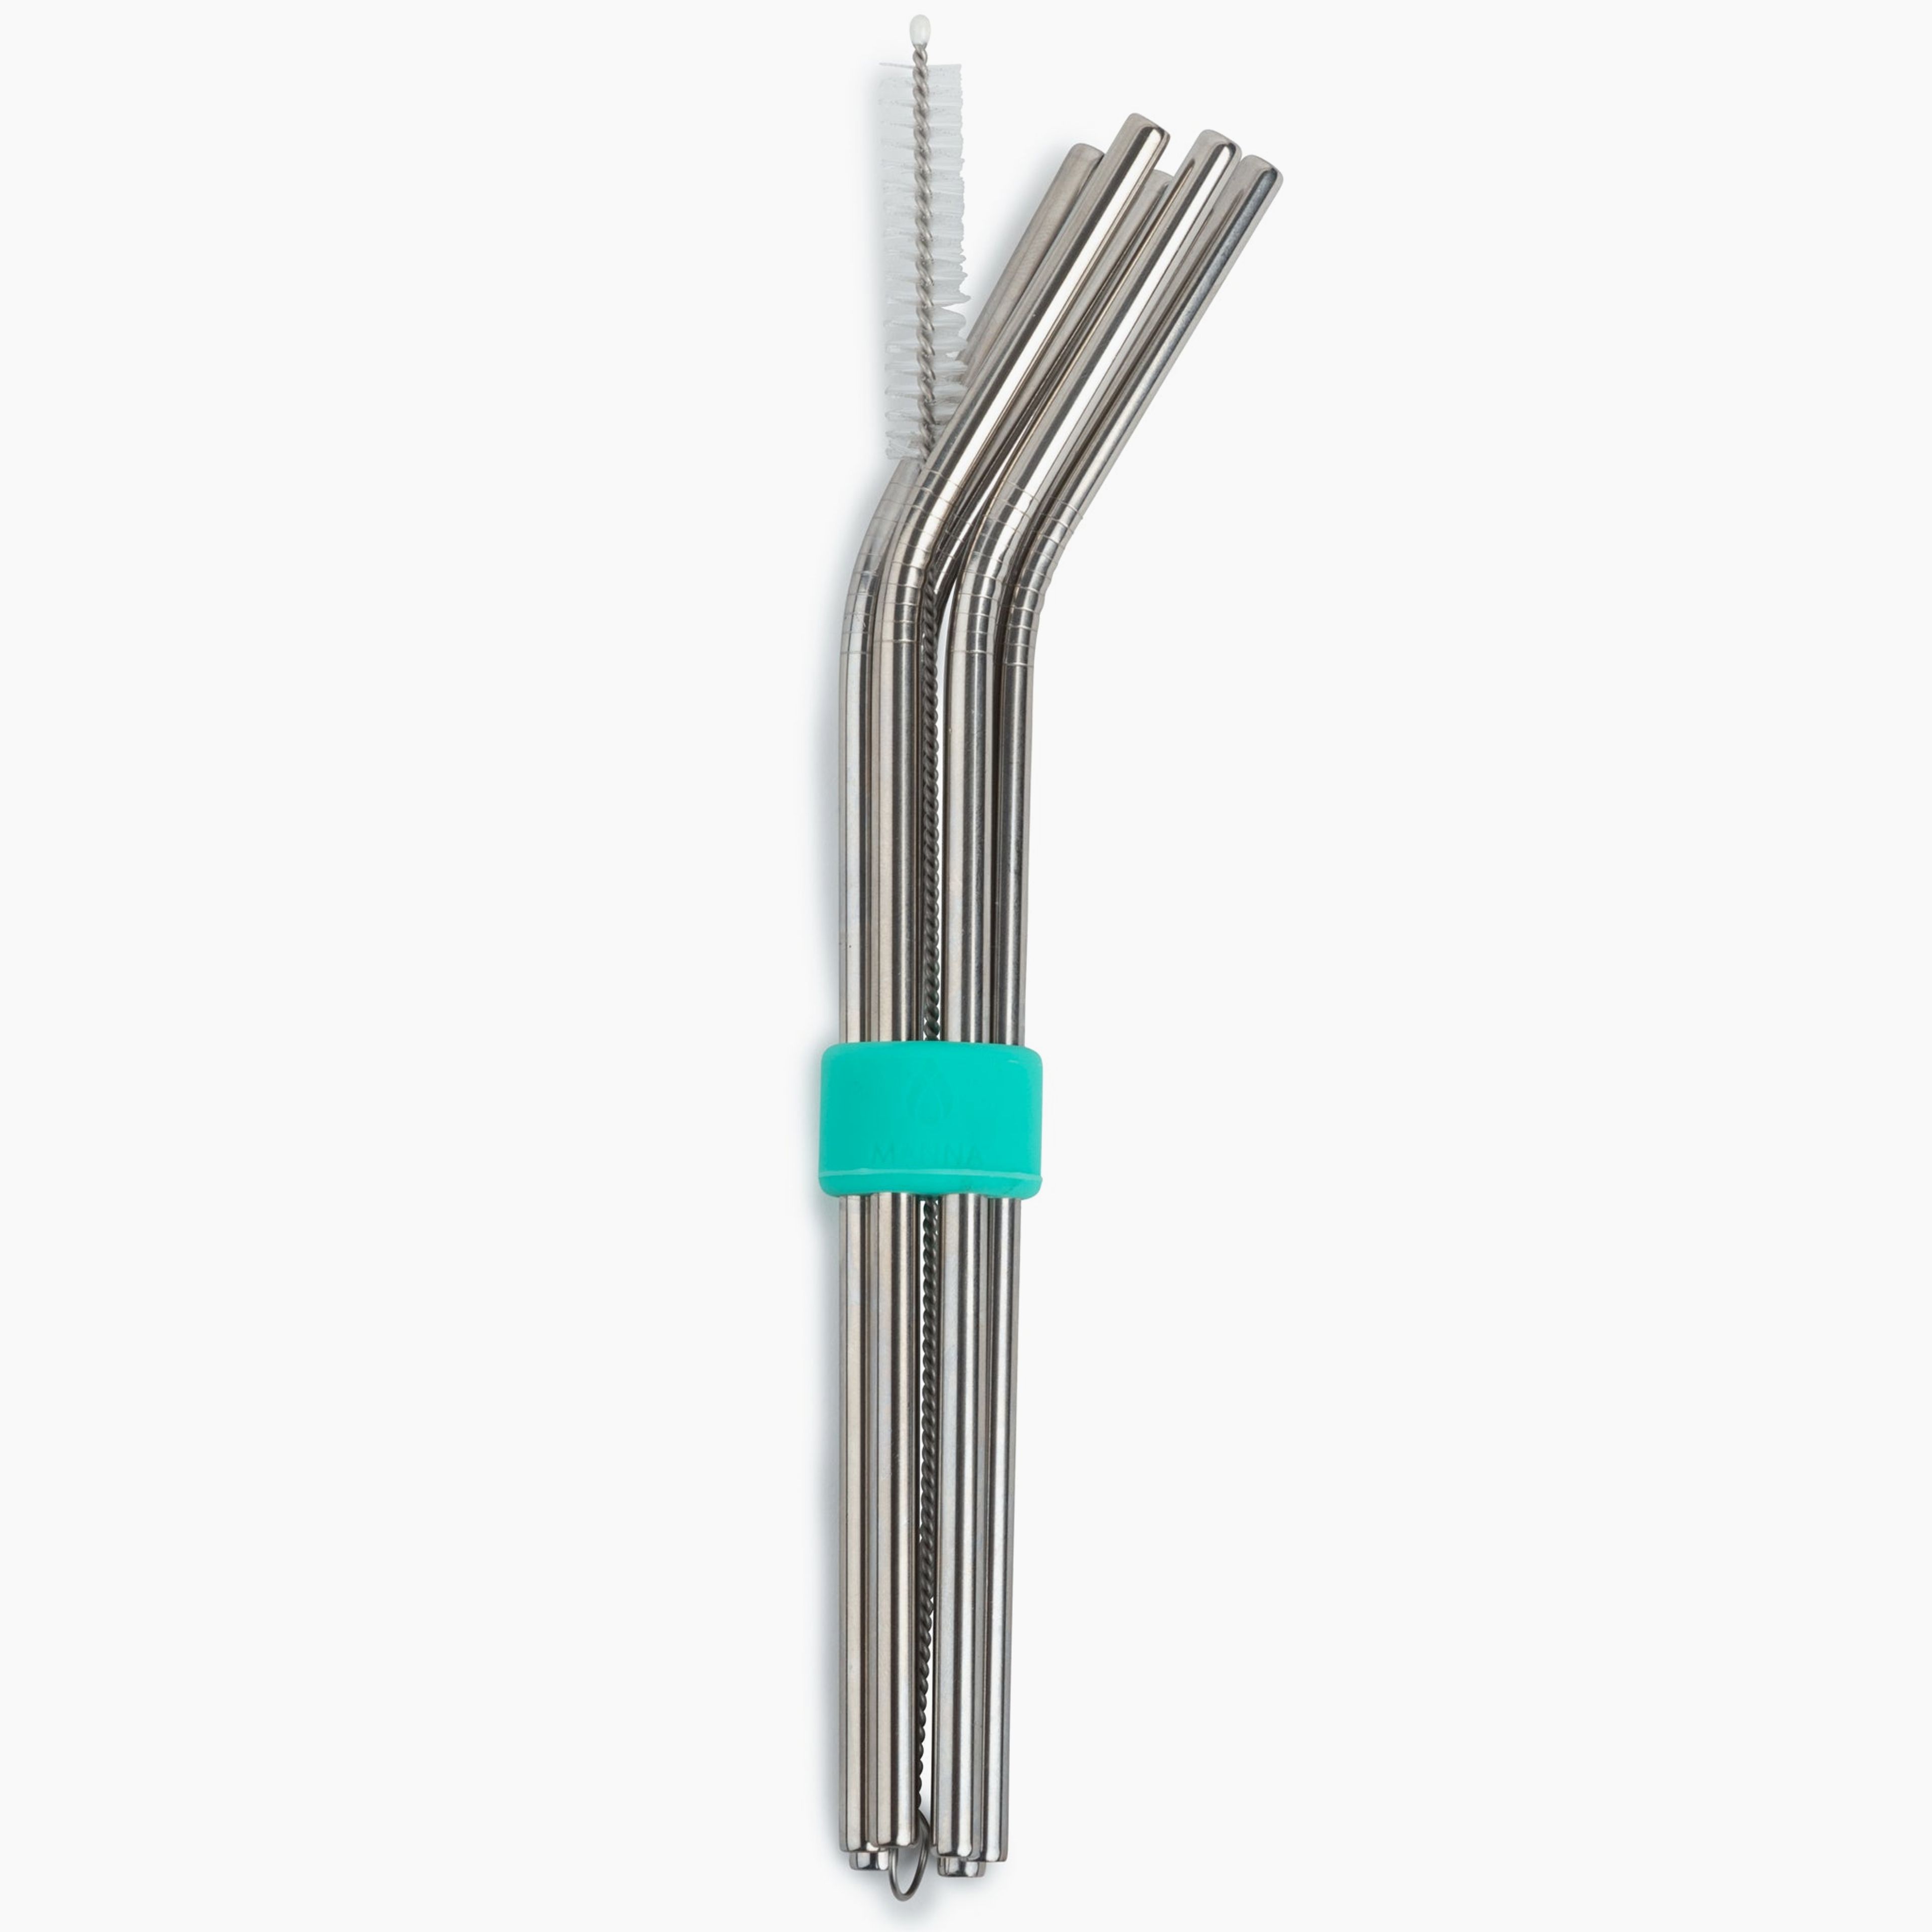 Set of 8 Stainless Steel Reusable Straws&Silicone Straw Holder